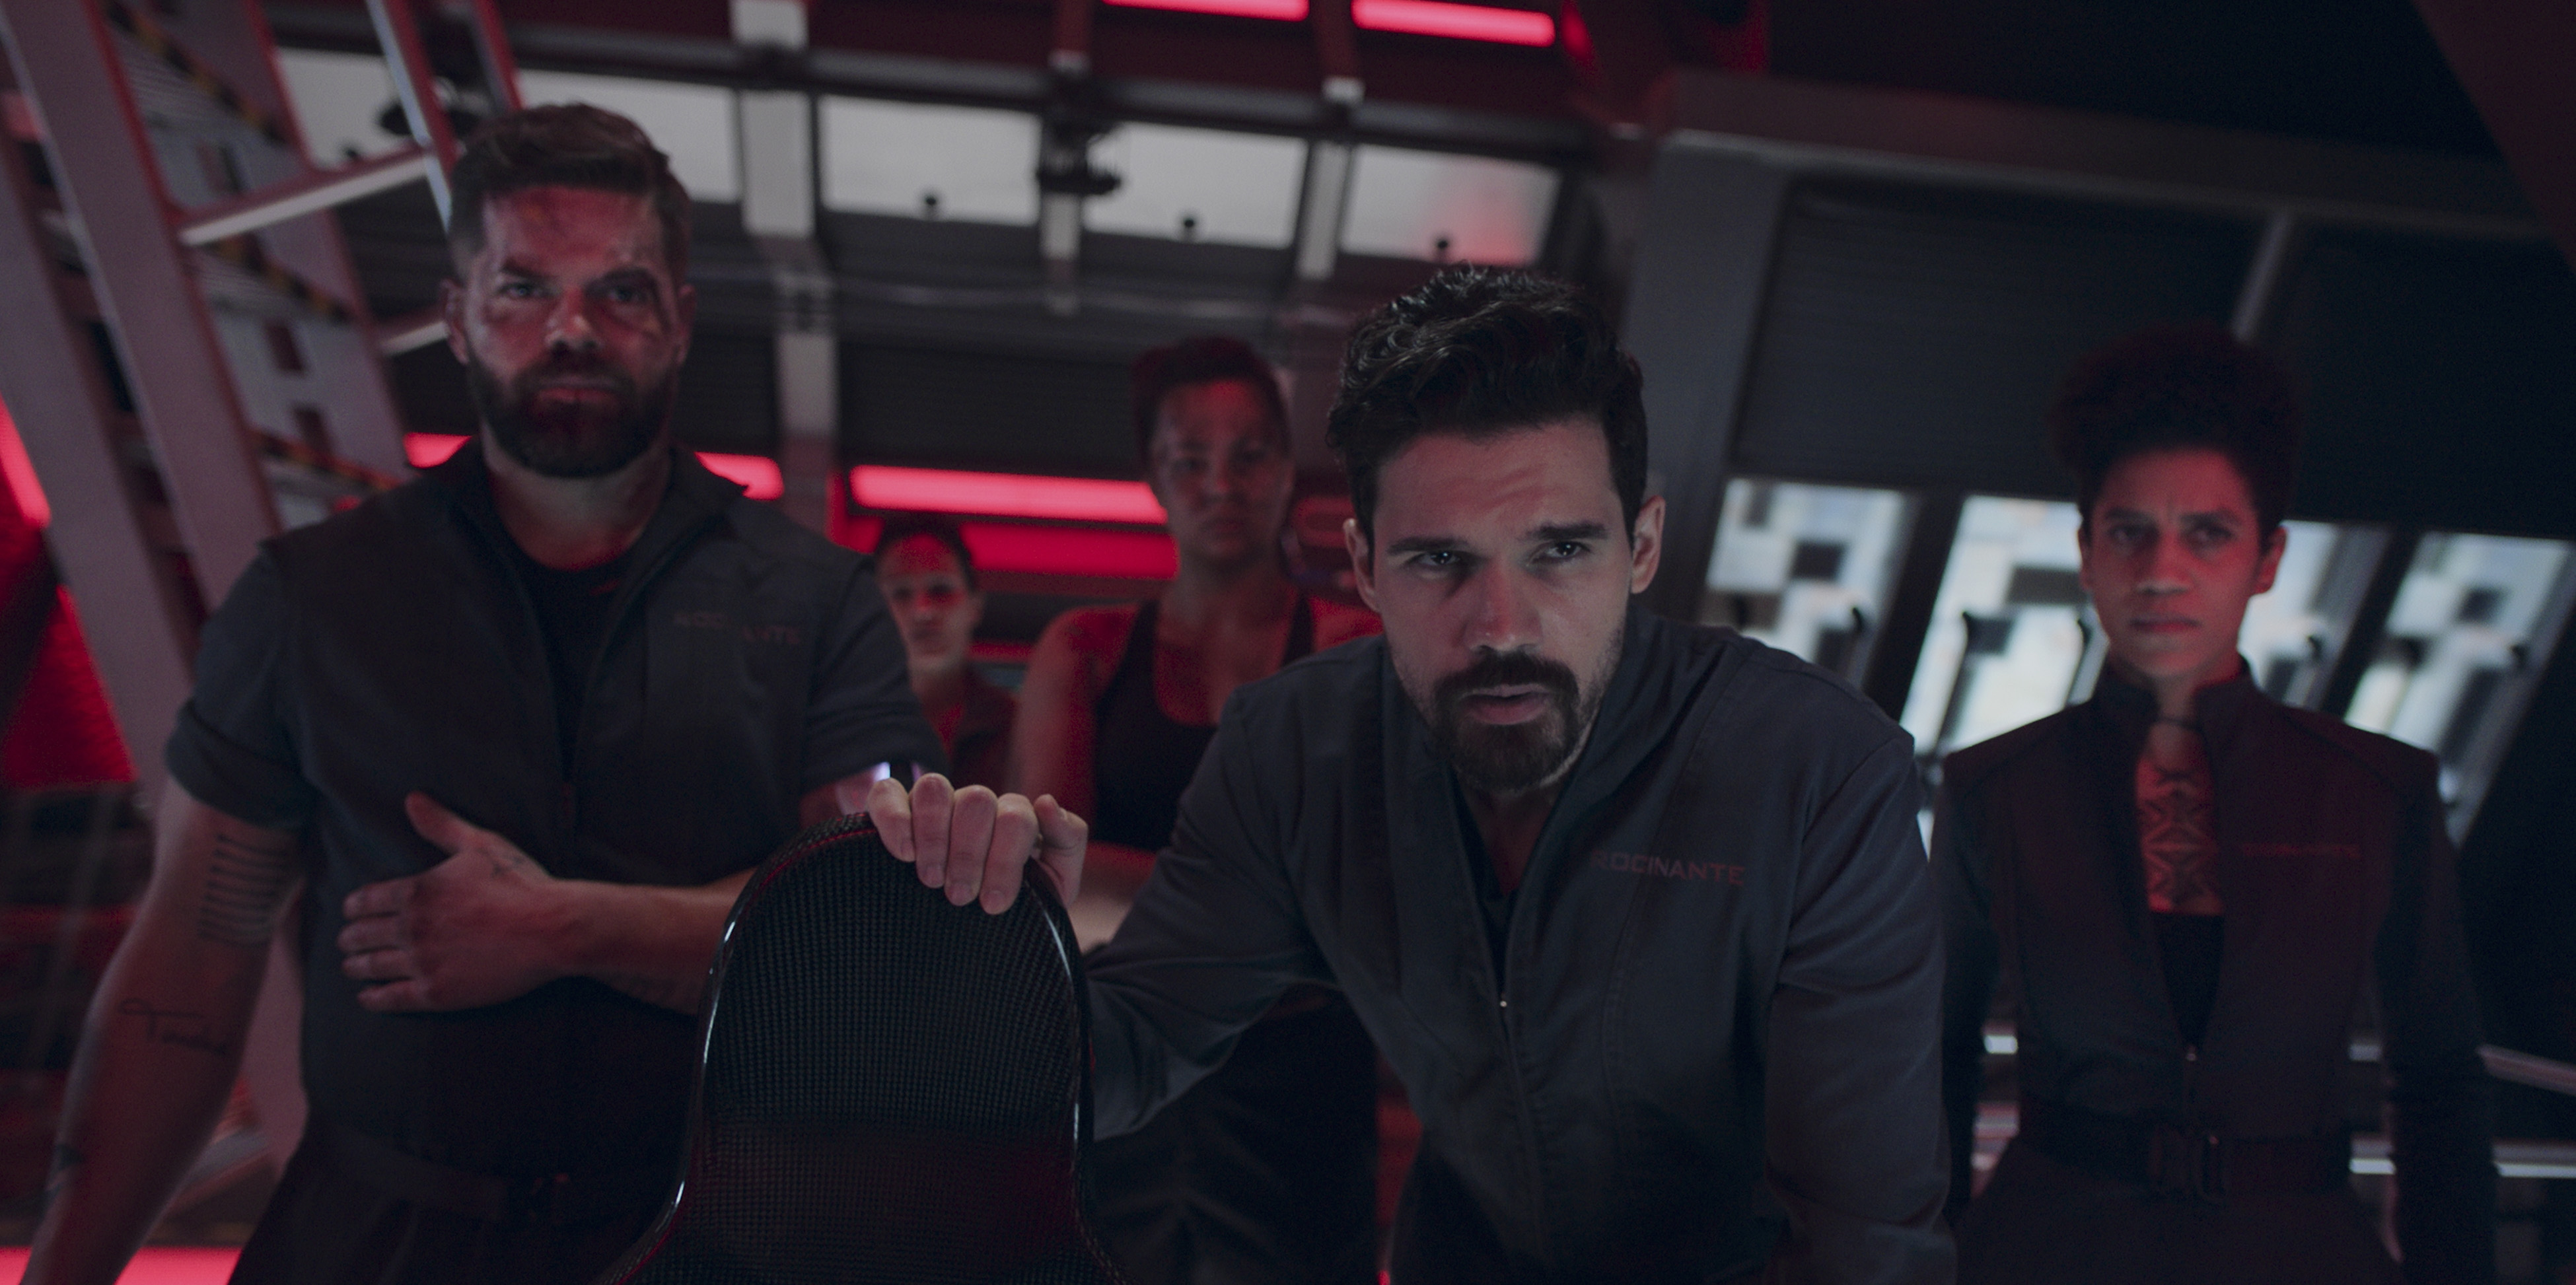 The crew of the Rocinante staring at the camera in a still from the final season of The Expanse